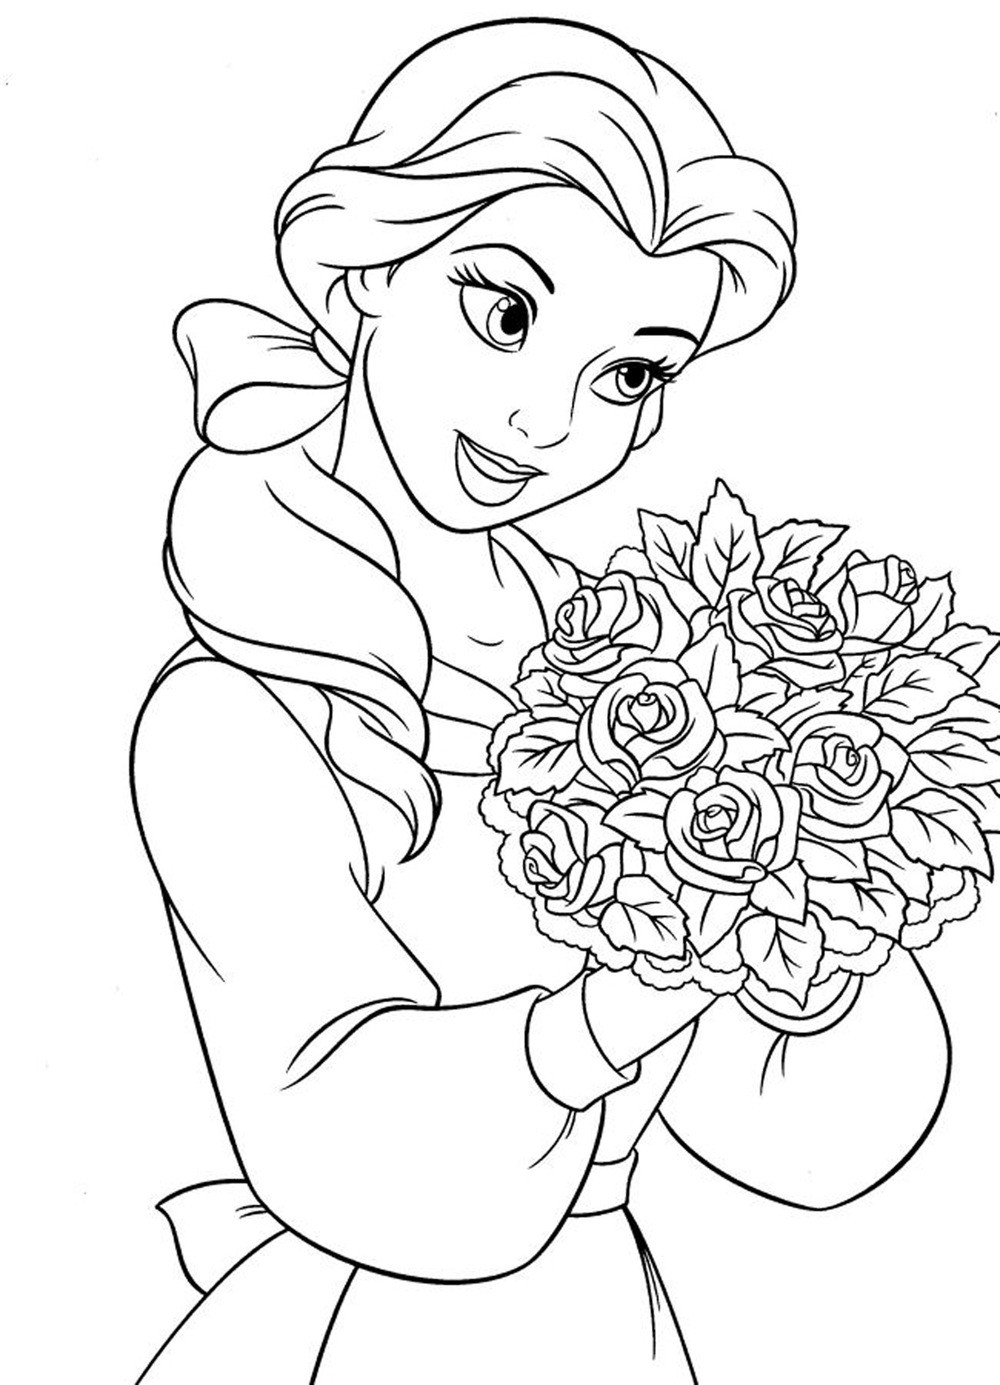 Disney Coloring Pages For Girls
 Free Printable Disney Princess Coloring Pages For Kids